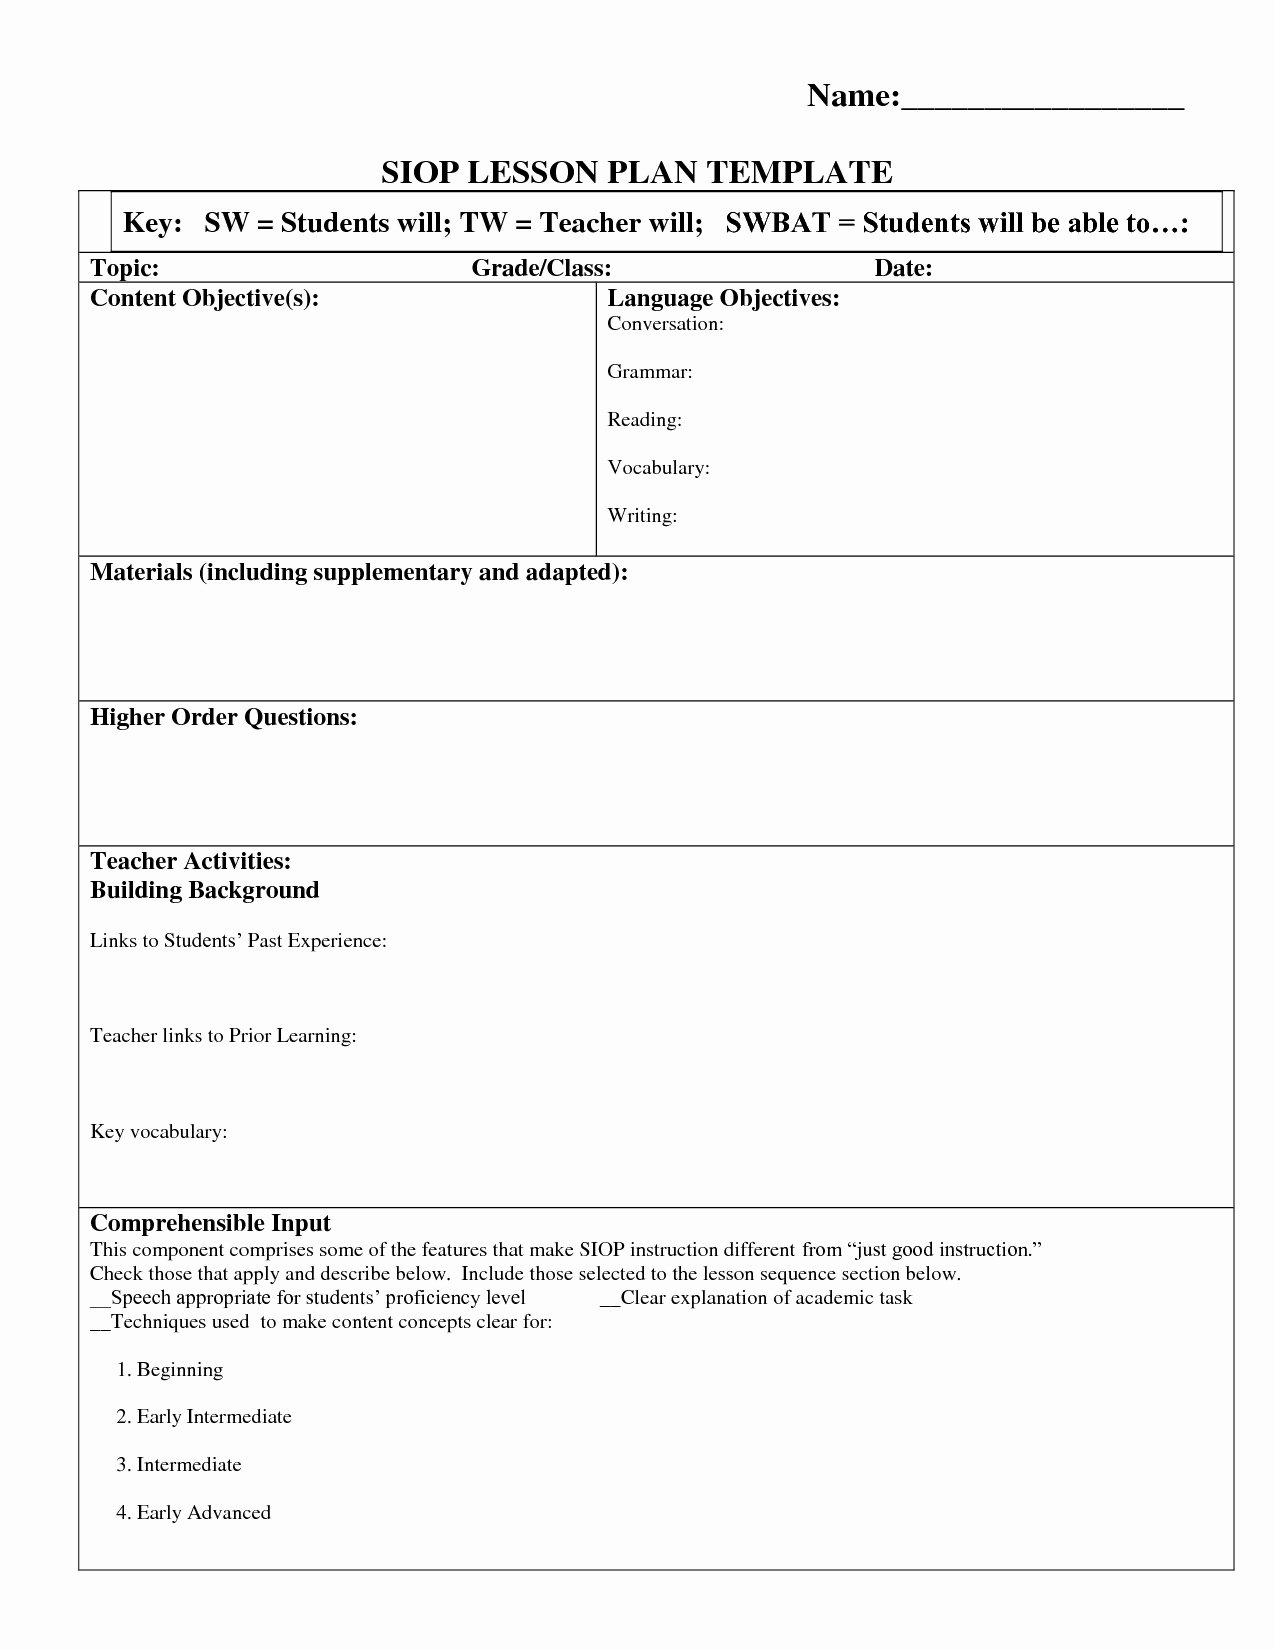 Siop Lesson Plan Template 3 Luxury Siop Lesson Plan Template